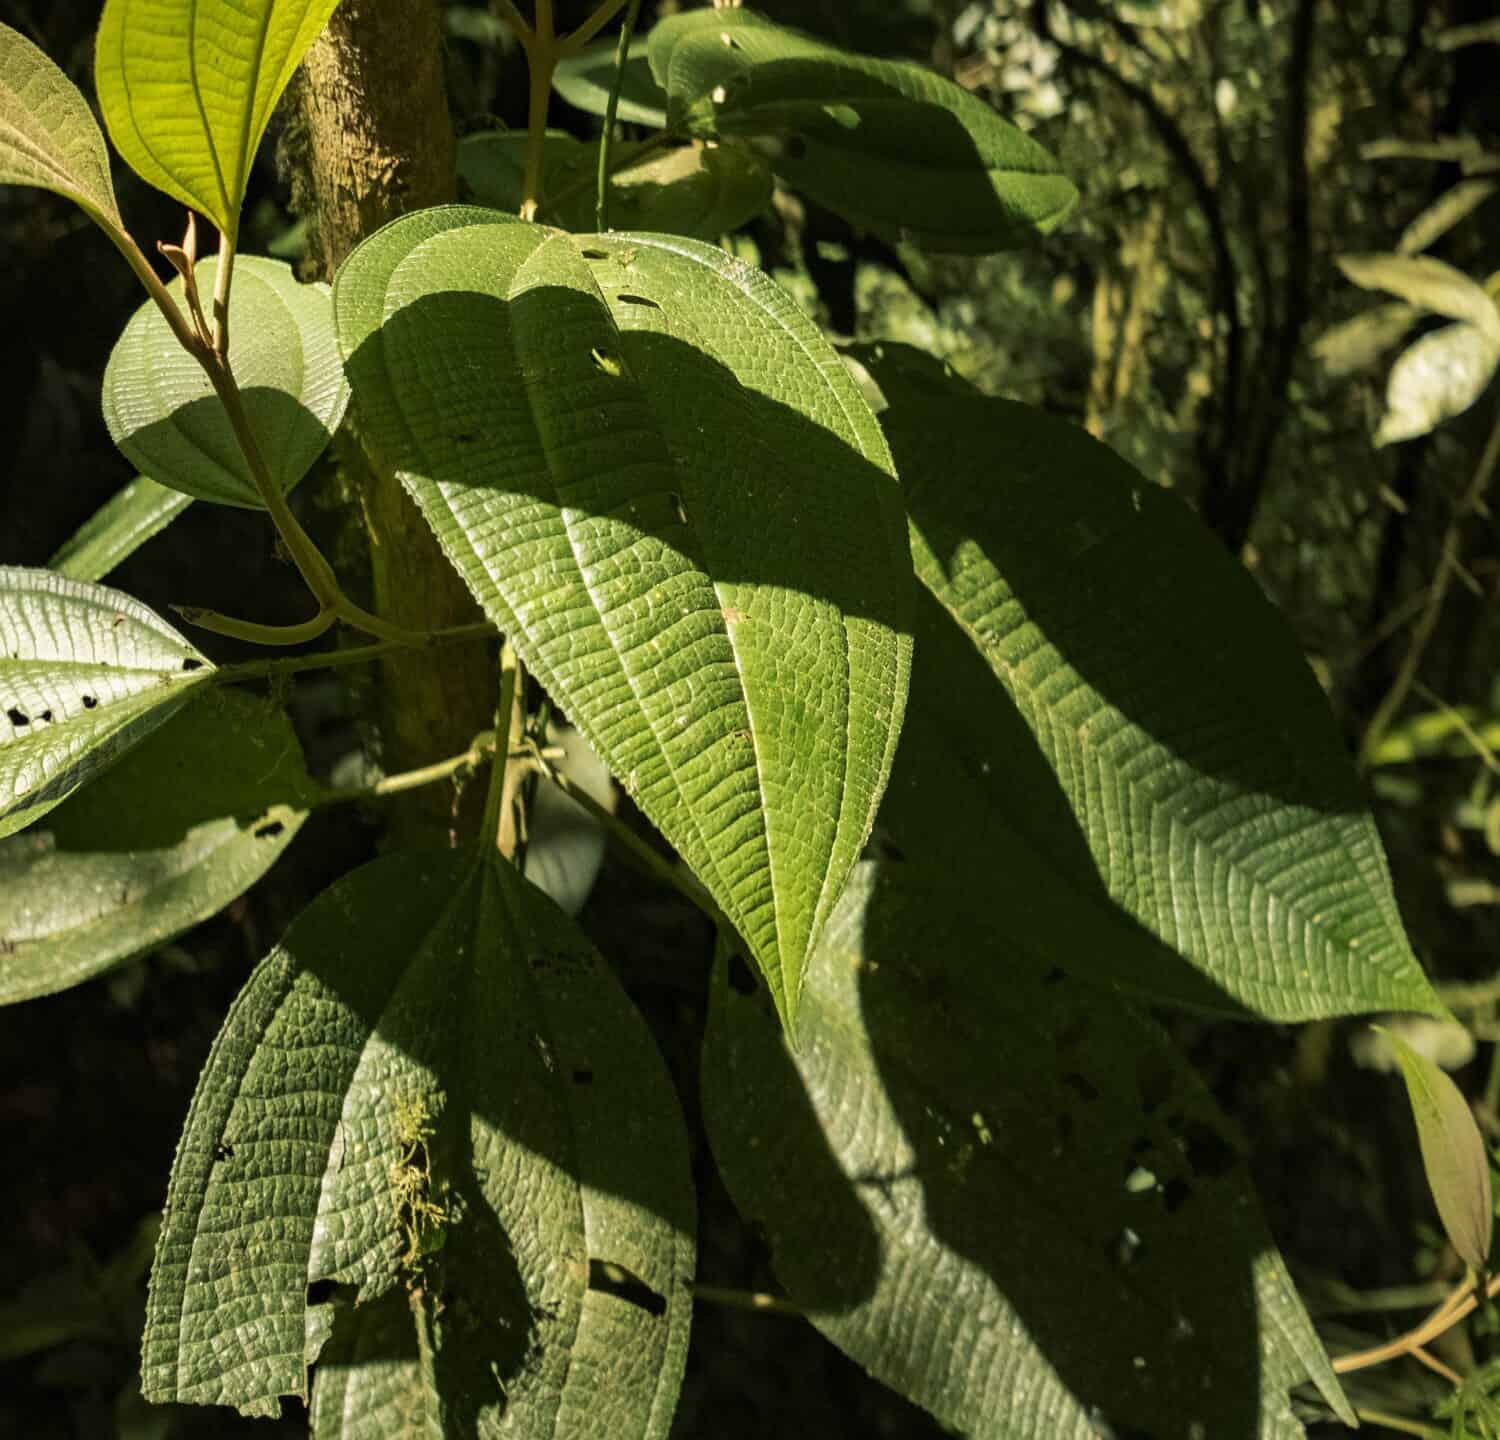 A miconia calvescens in the forests of Colombia